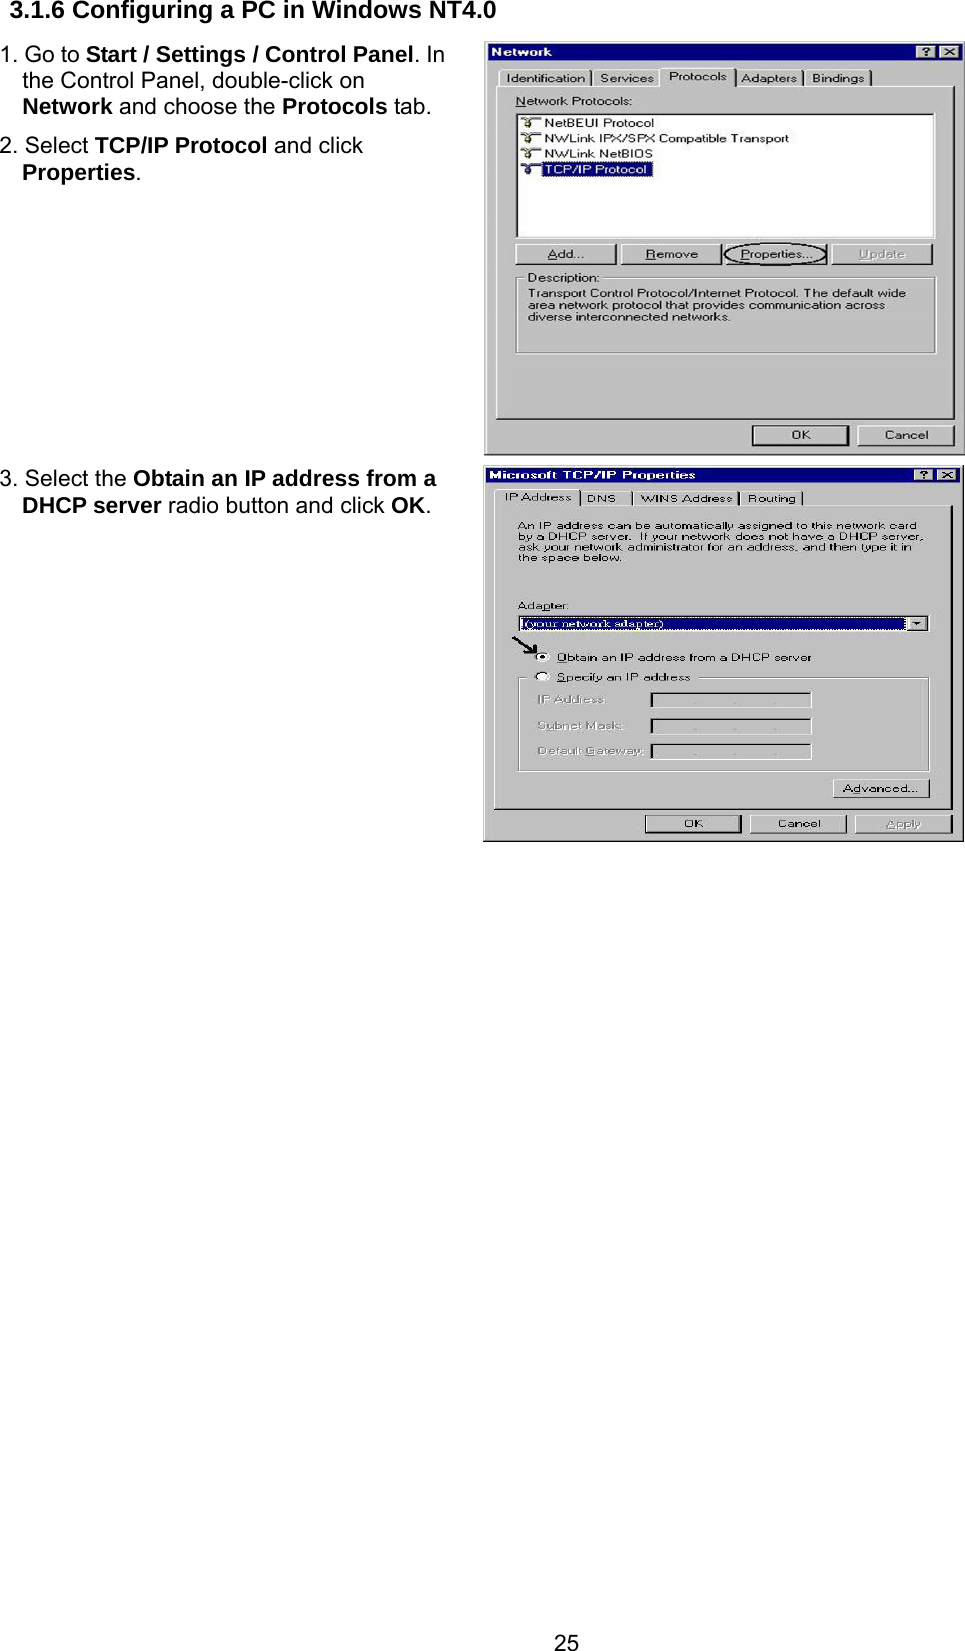 25 3.1.6 Configuring a PC in Windows NT4.0 1. Go to Start / Settings / Control Panel. In the Control Panel, double-click on Network and choose the Protocols tab. 2. Select TCP/IP Protocol and click Properties.   3. Select the Obtain an IP address from a DHCP server radio button and click OK.                    